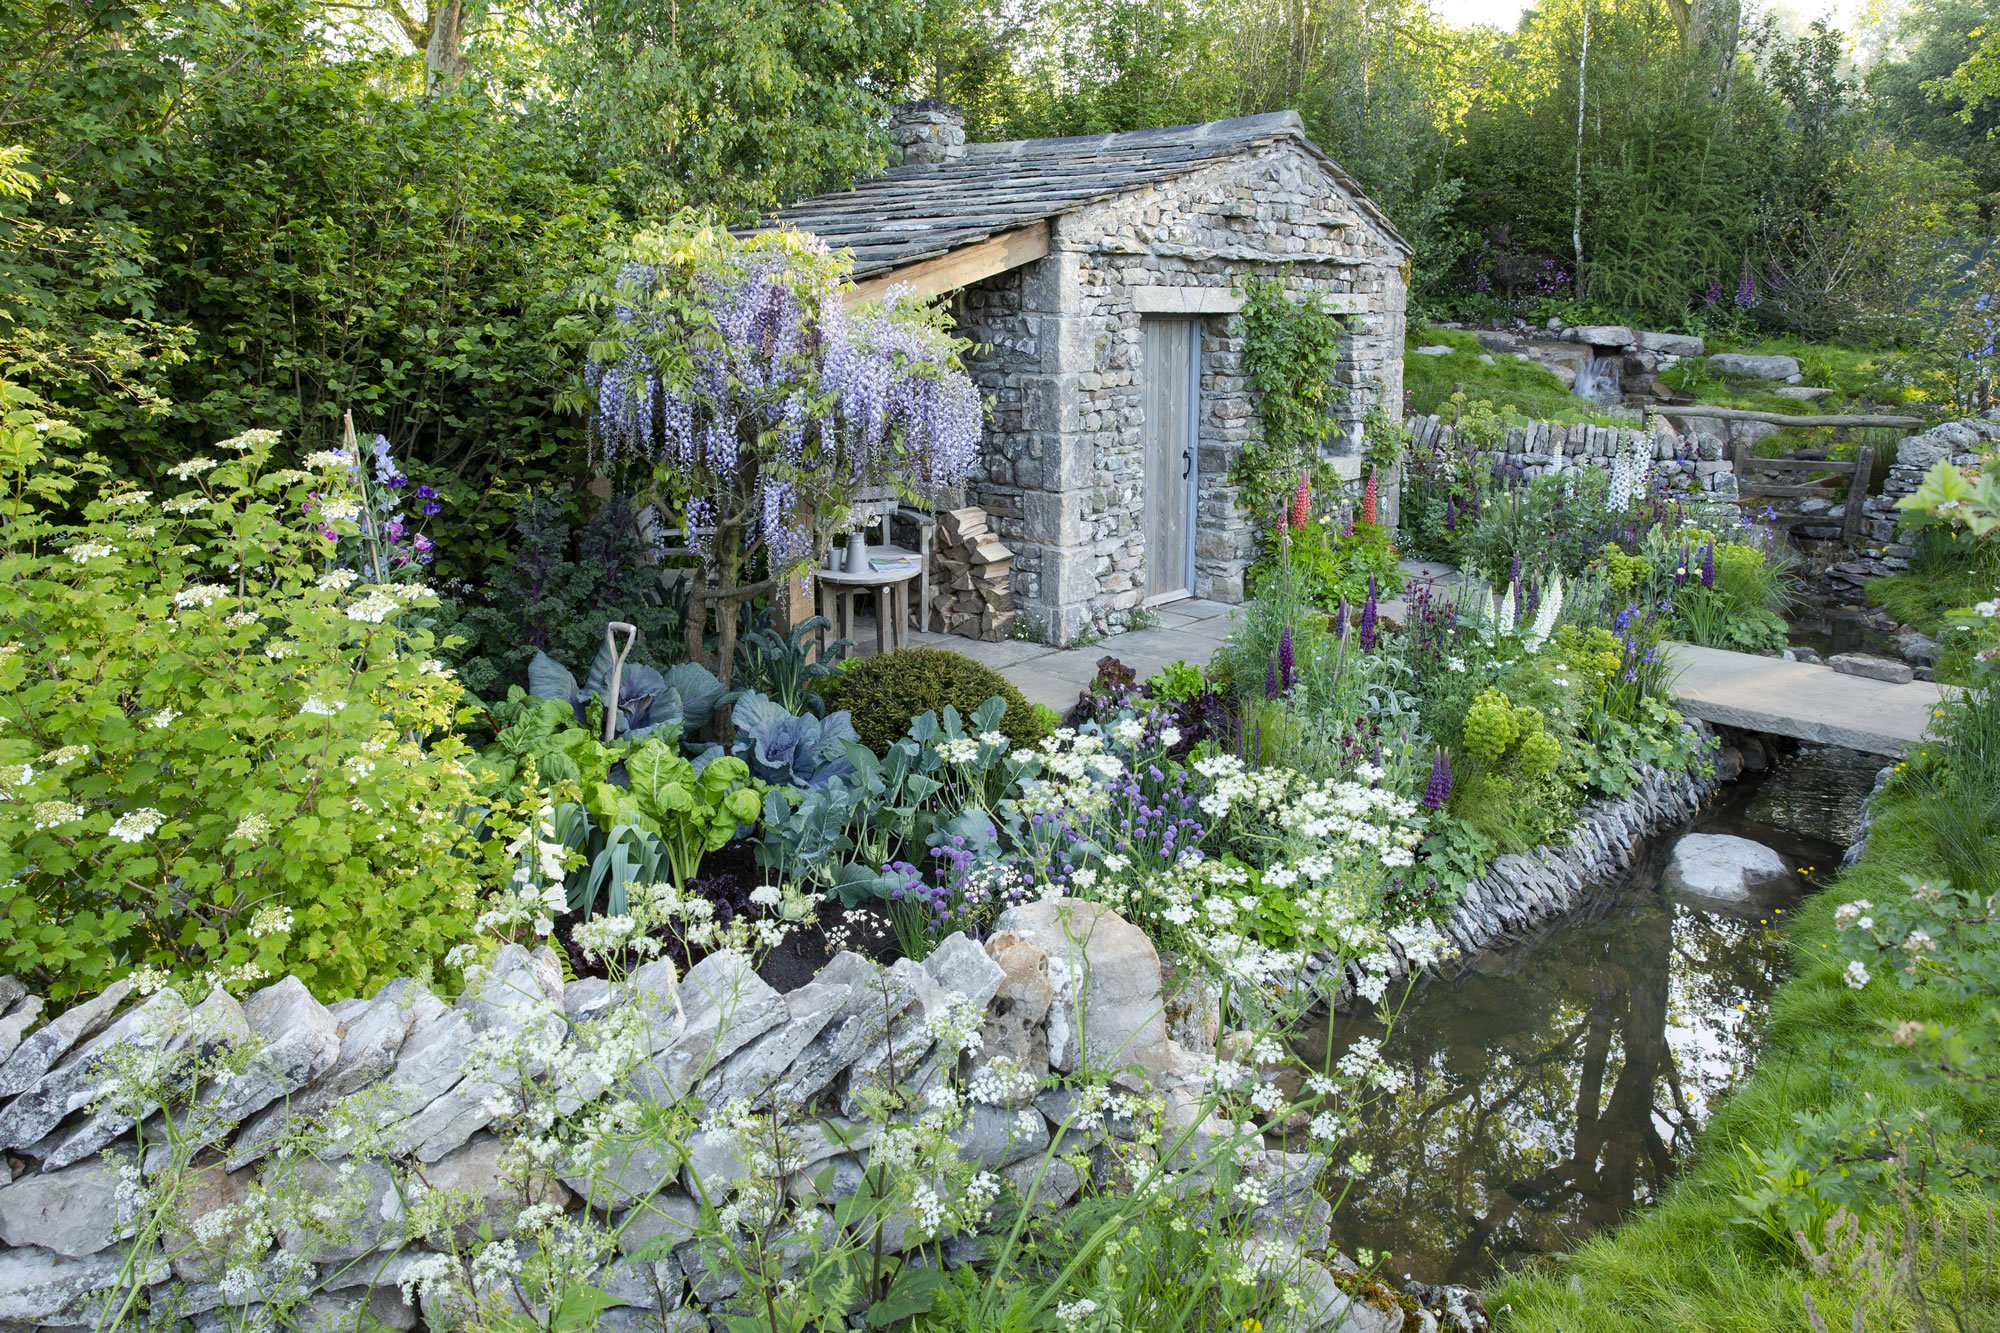 Image name wtylandformchelsea19 1 the 9 image from the post <strong>Welcome to Yorkshire Chelsea Garden Wins BBC RHS People’s Choice Award as Garden of the Decade </strong> in Yorkshire.com.